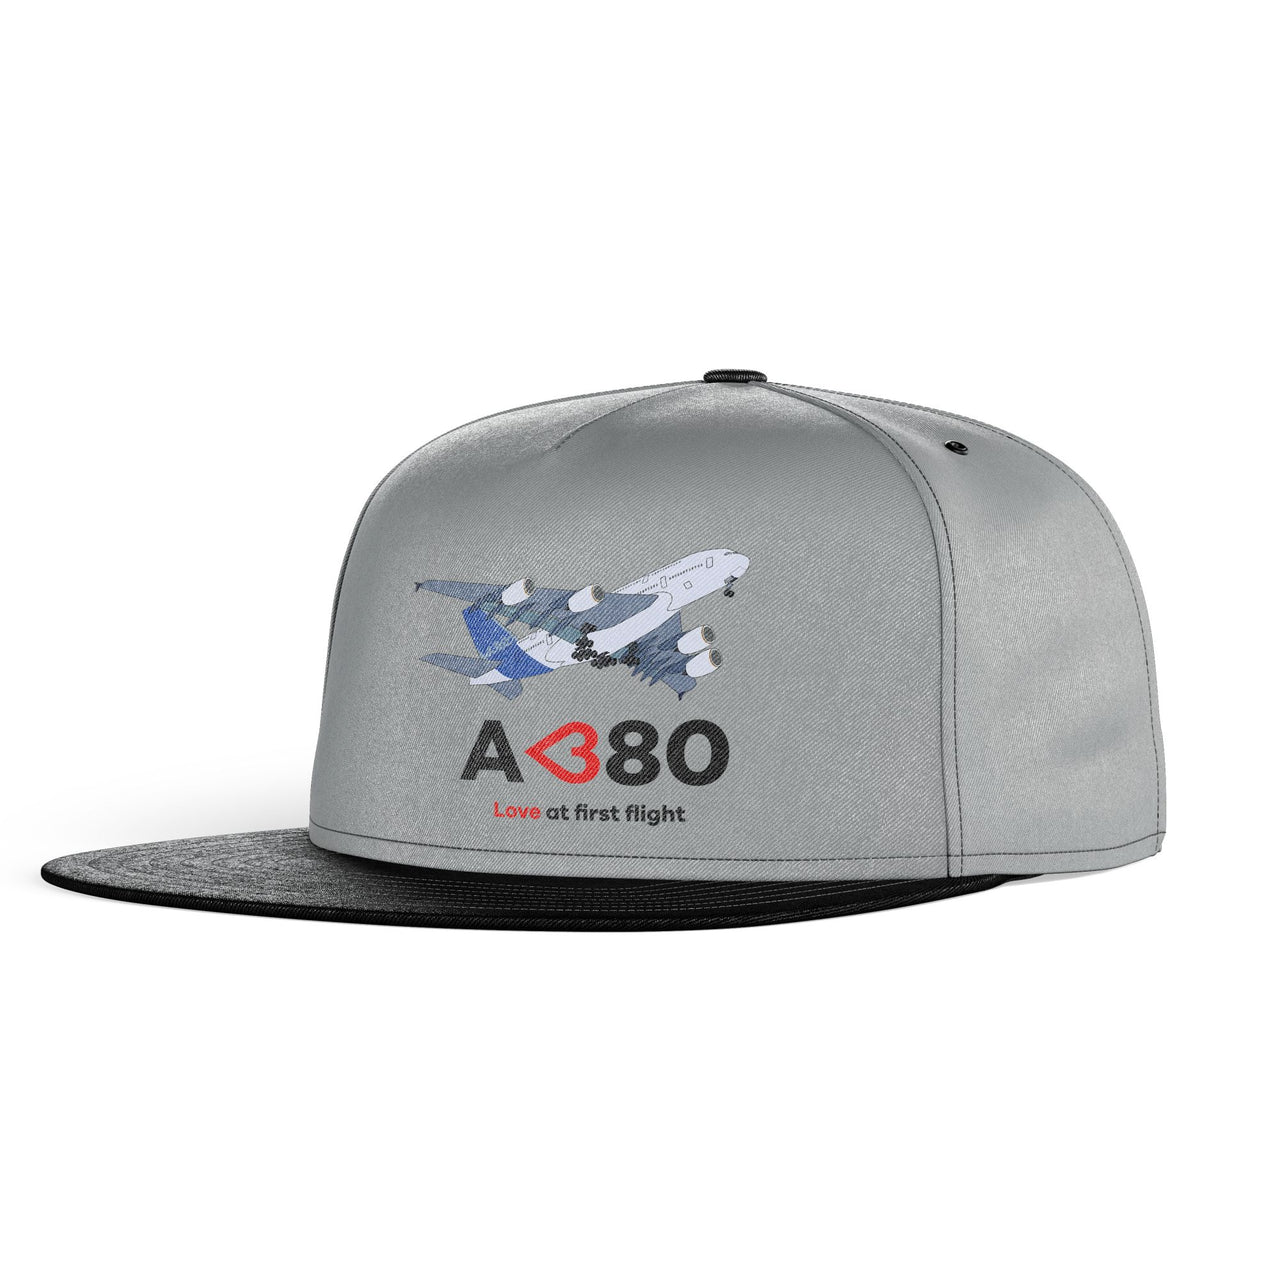 Airbus A380 Love at first flight Designed Snapback Caps & Hats